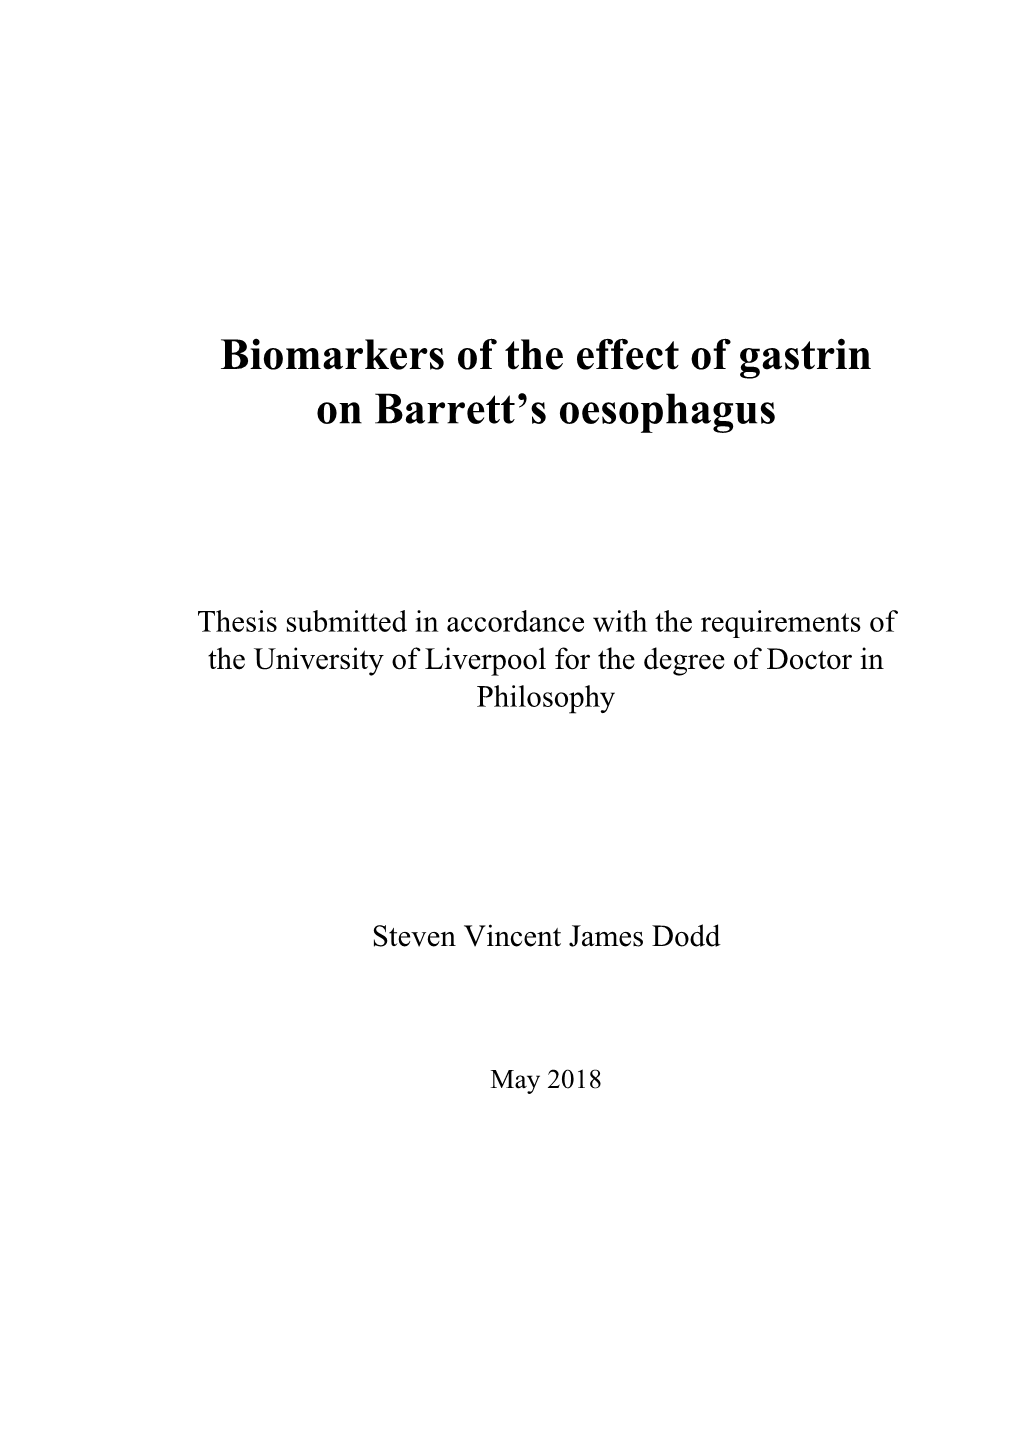 Biomarkers of the Effect of Gastrin on Barrett's Oesophagus